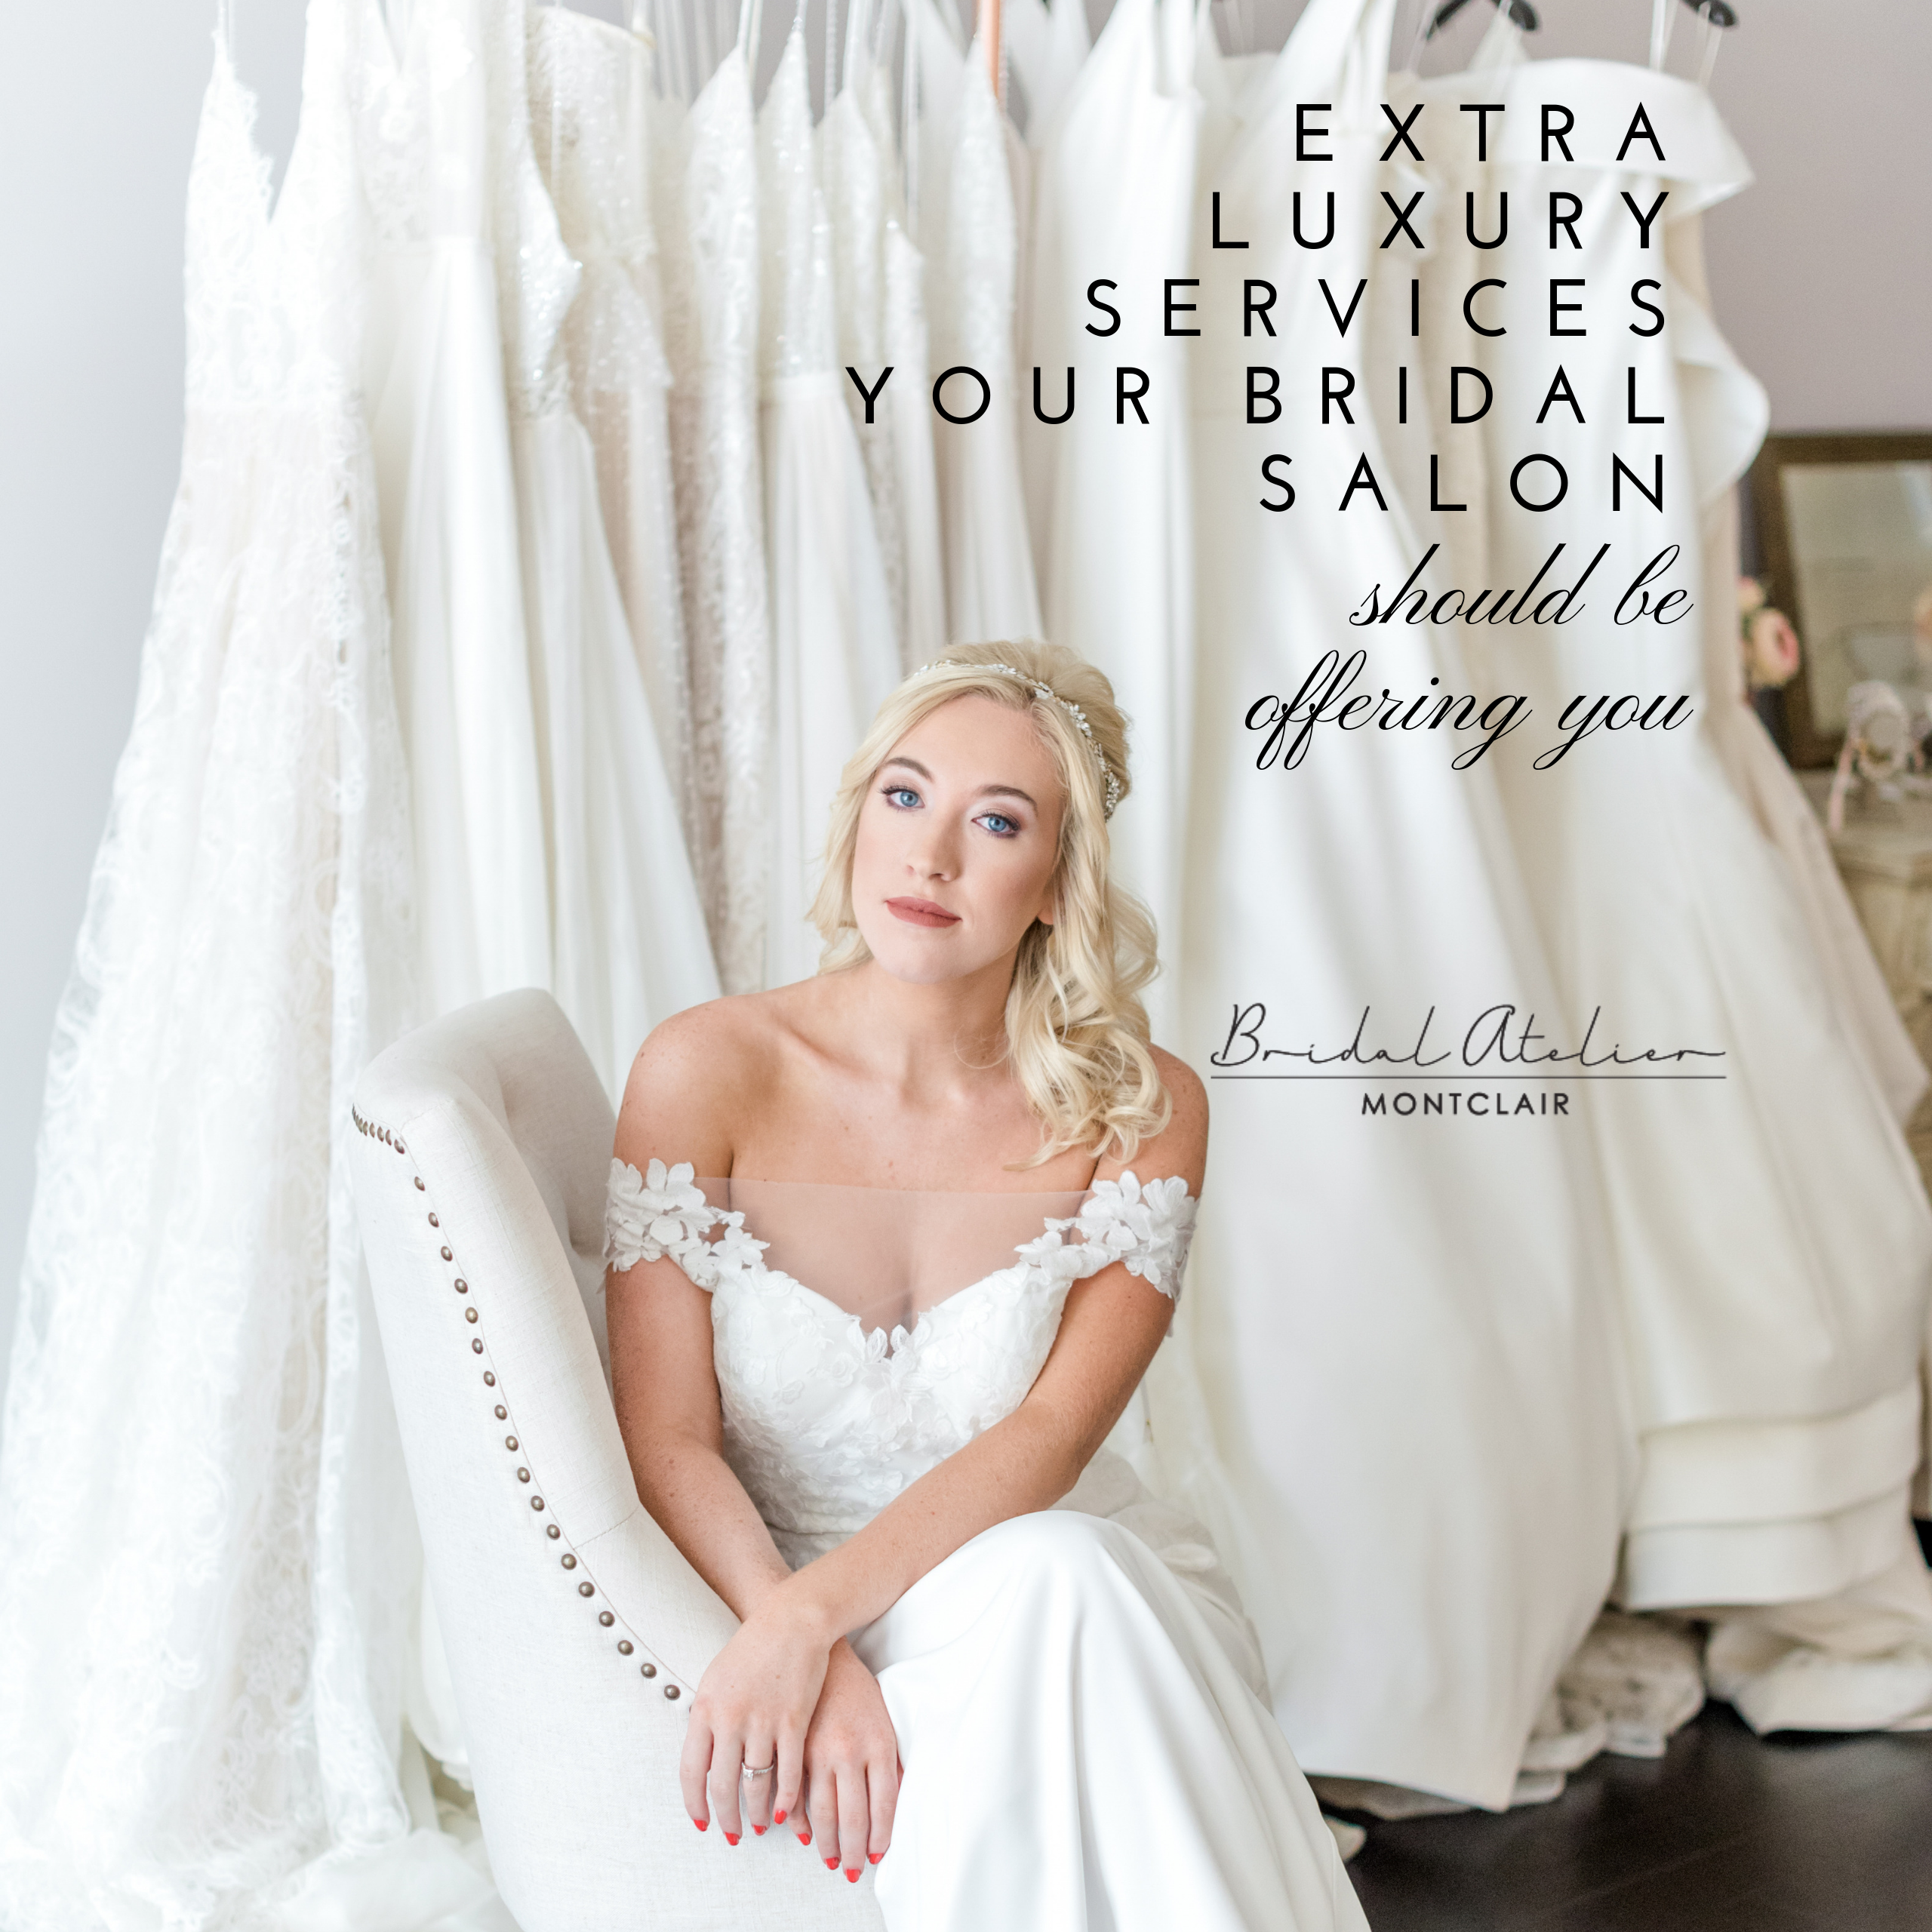 Extra Luxury Services Your Bridal Salon Should be Offering You Image